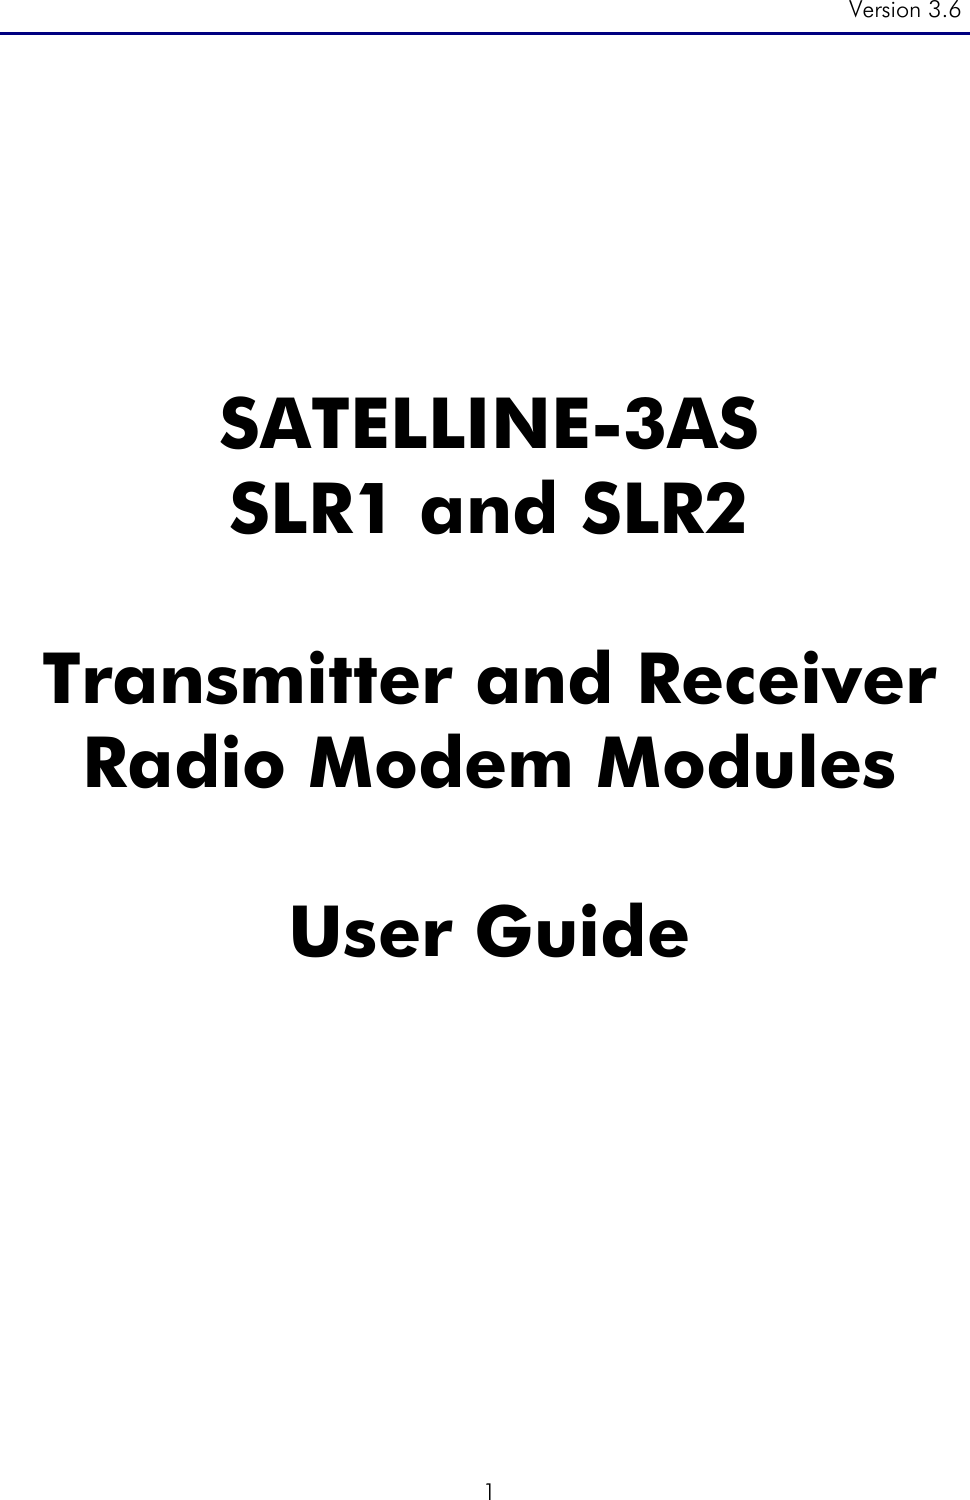 Version 3.6  1       SATELLINE-3AS SLR1 and SLR2  Transmitter and Receiver   Radio Modem Modules  User Guide              